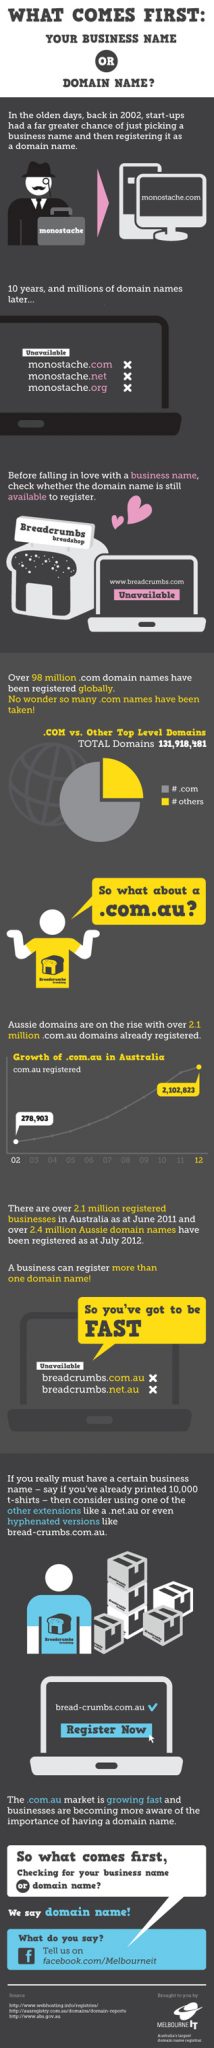 Business or domain name? Infographic